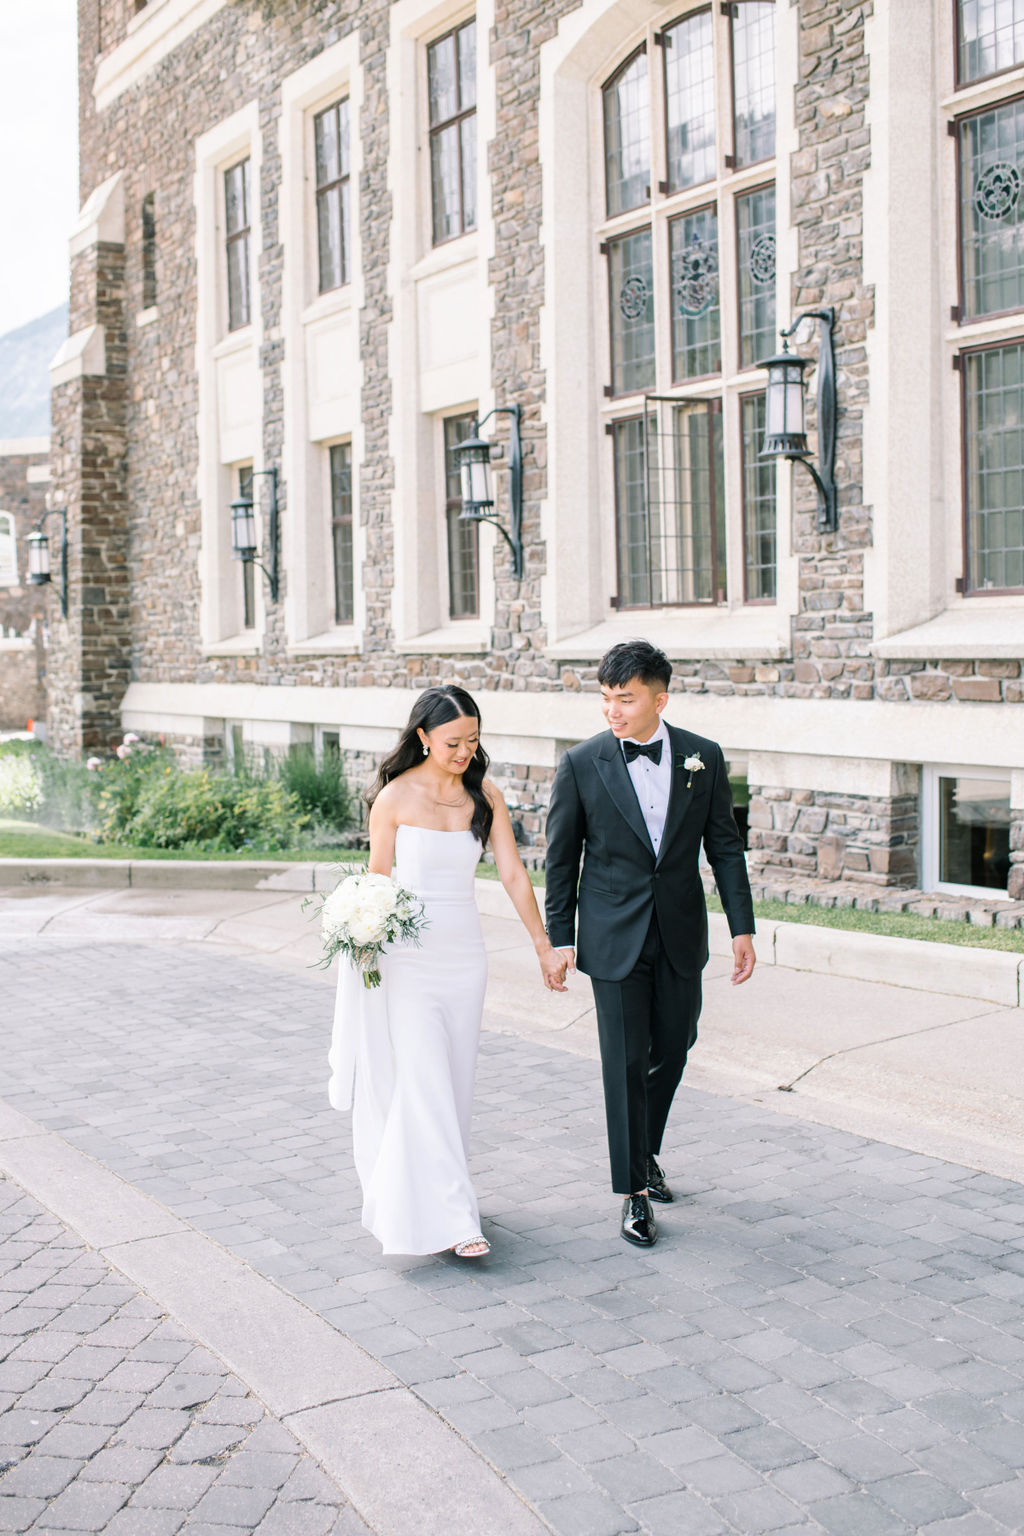 Bride and groom at their Fairmont Banff Springs Golf and Country Club wedding. Bride wearing sleek form fitting white bridal gown, holding classic bouquet of white roses and greenery. Summer wedding inspiration in Banff, Alberta. 